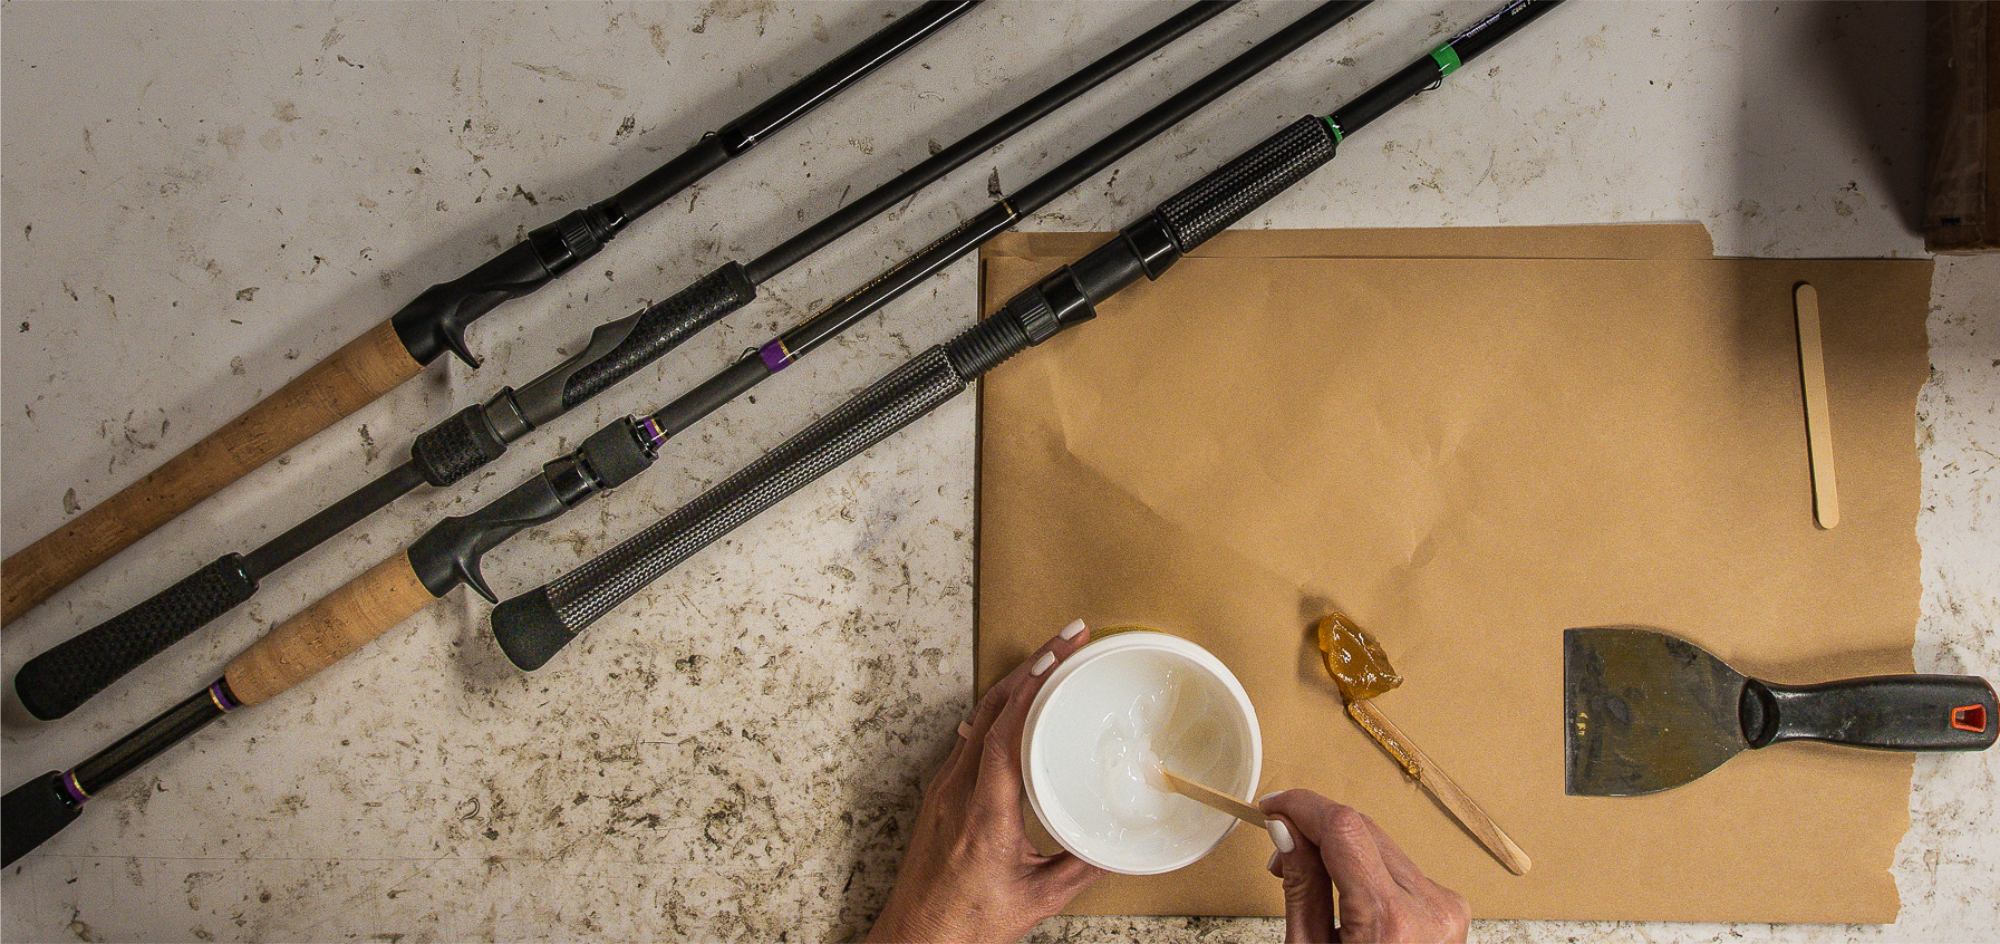 The building of custom fishing rods and custom built bass fishing rods. Four custom fishing rods with the handles being glued with two part epoxy.